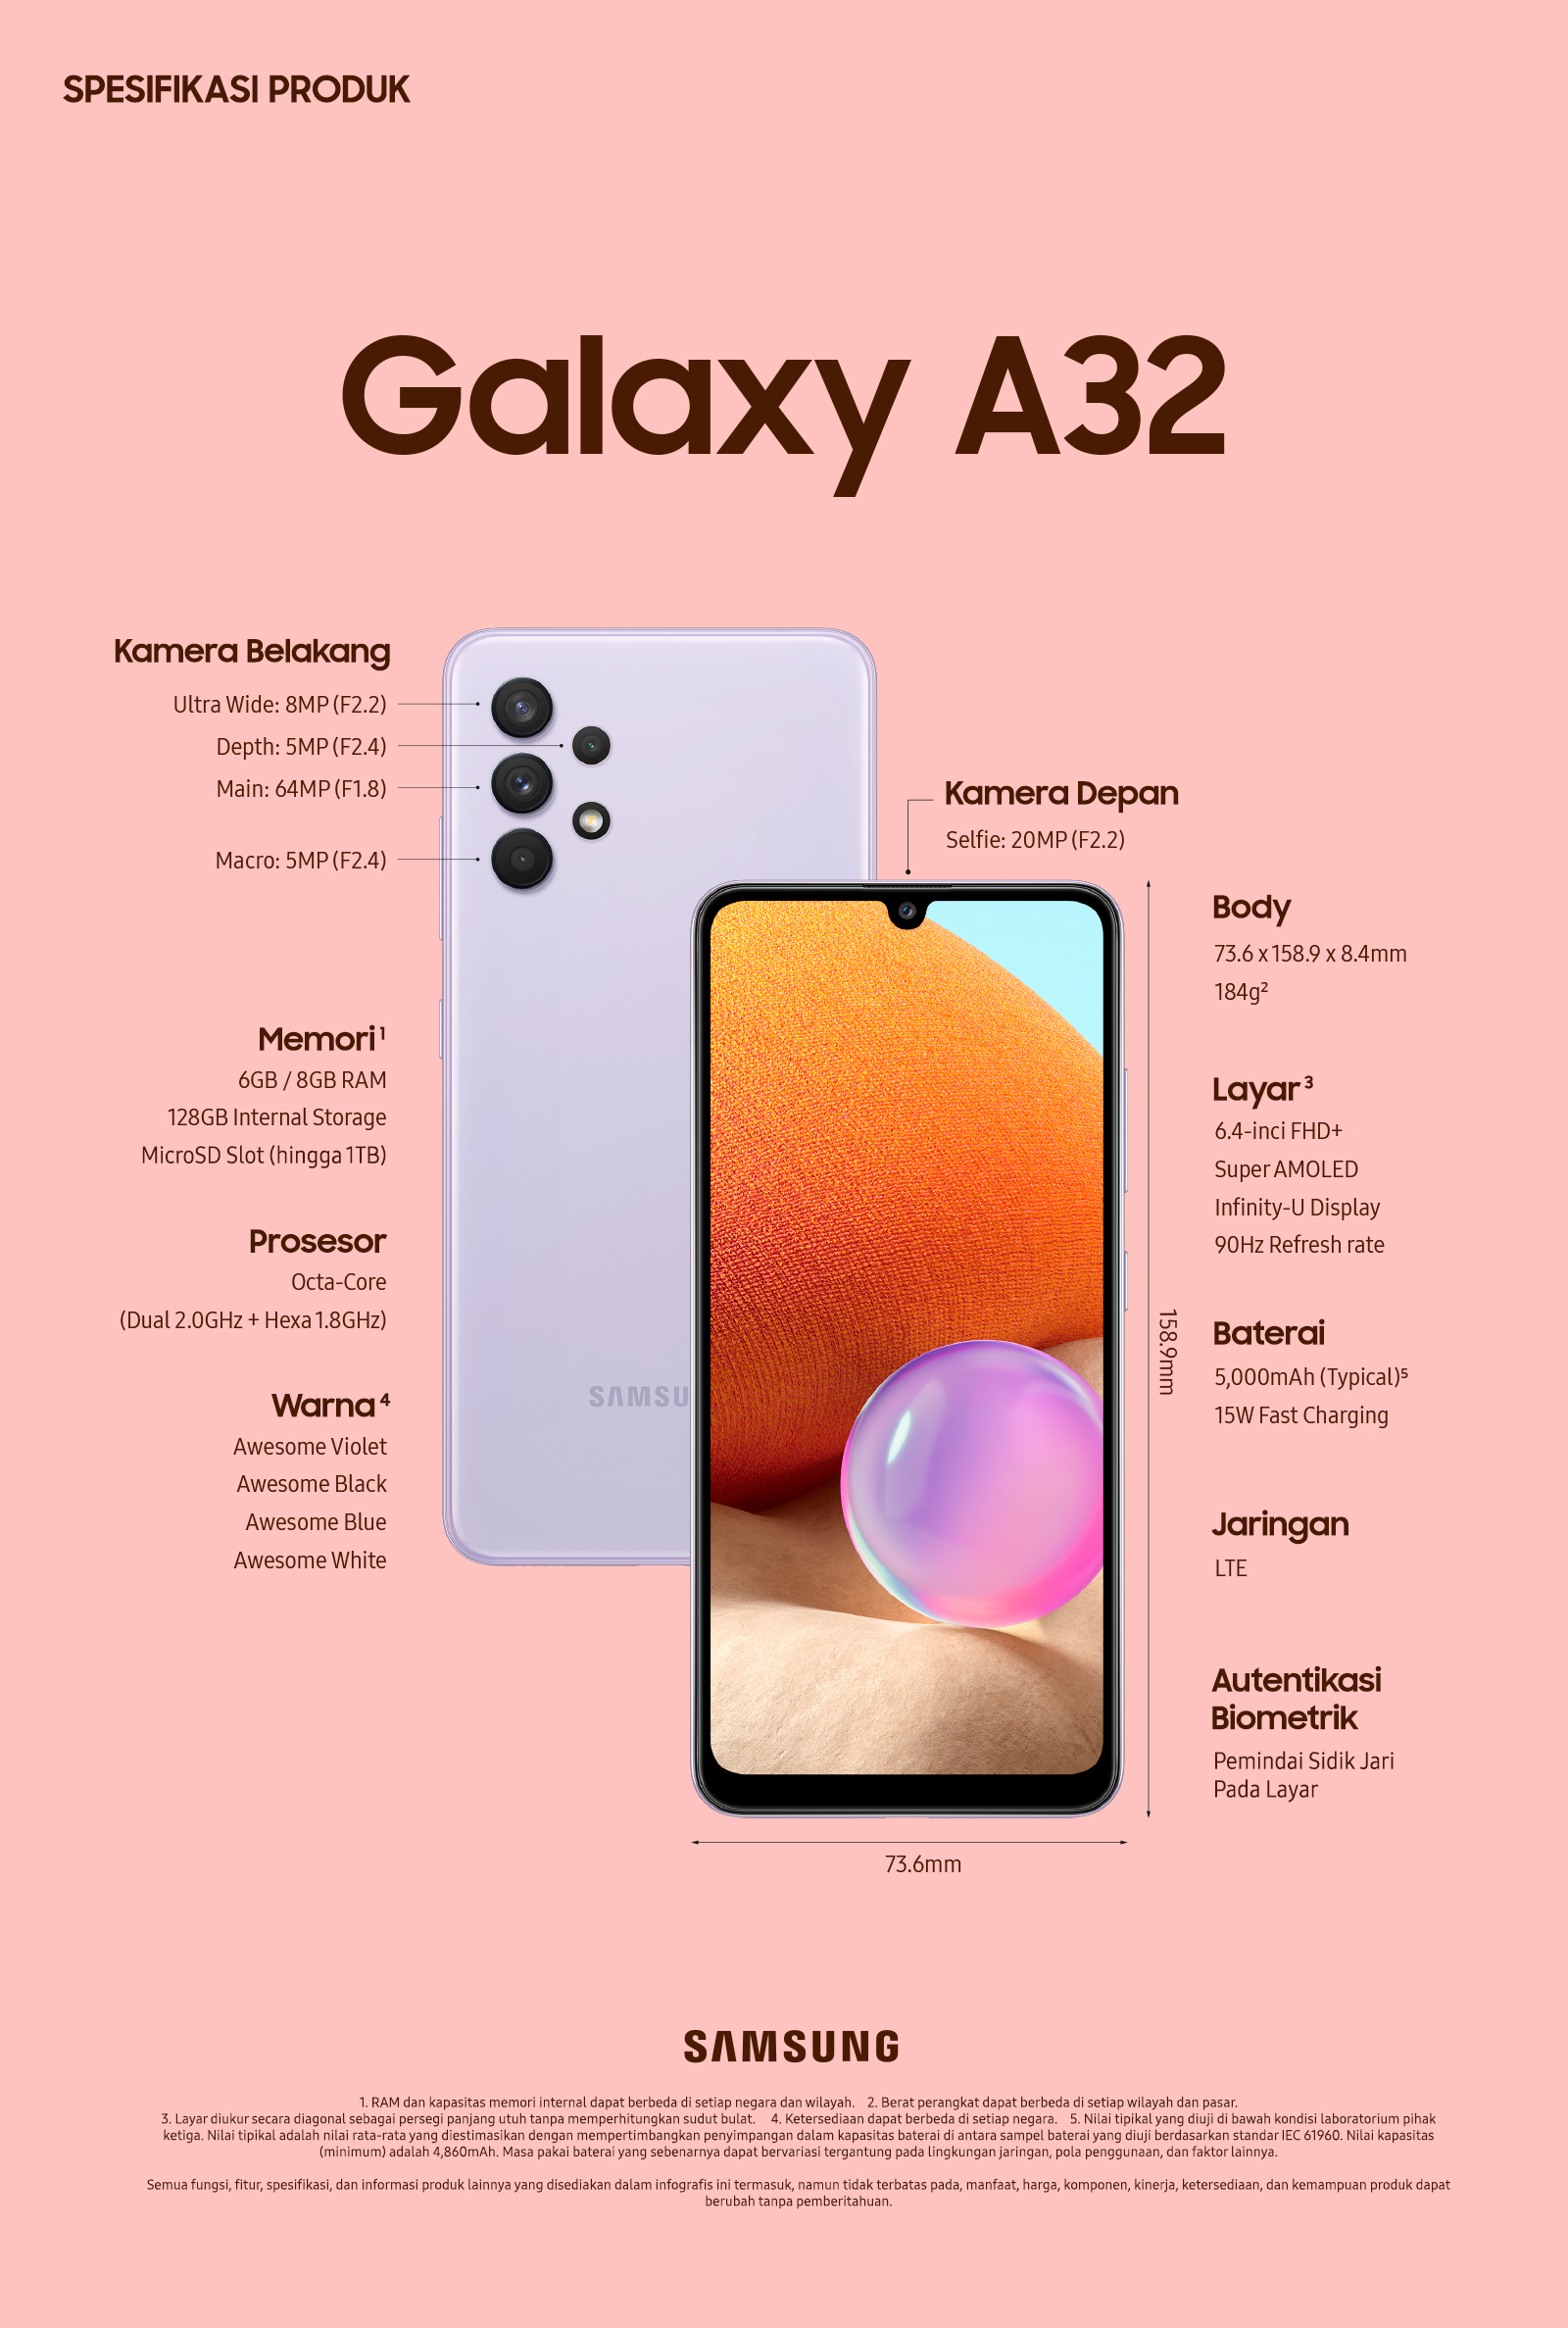 1615865645-Samsung-Galaxy-A32-Product-Infographic.jpg